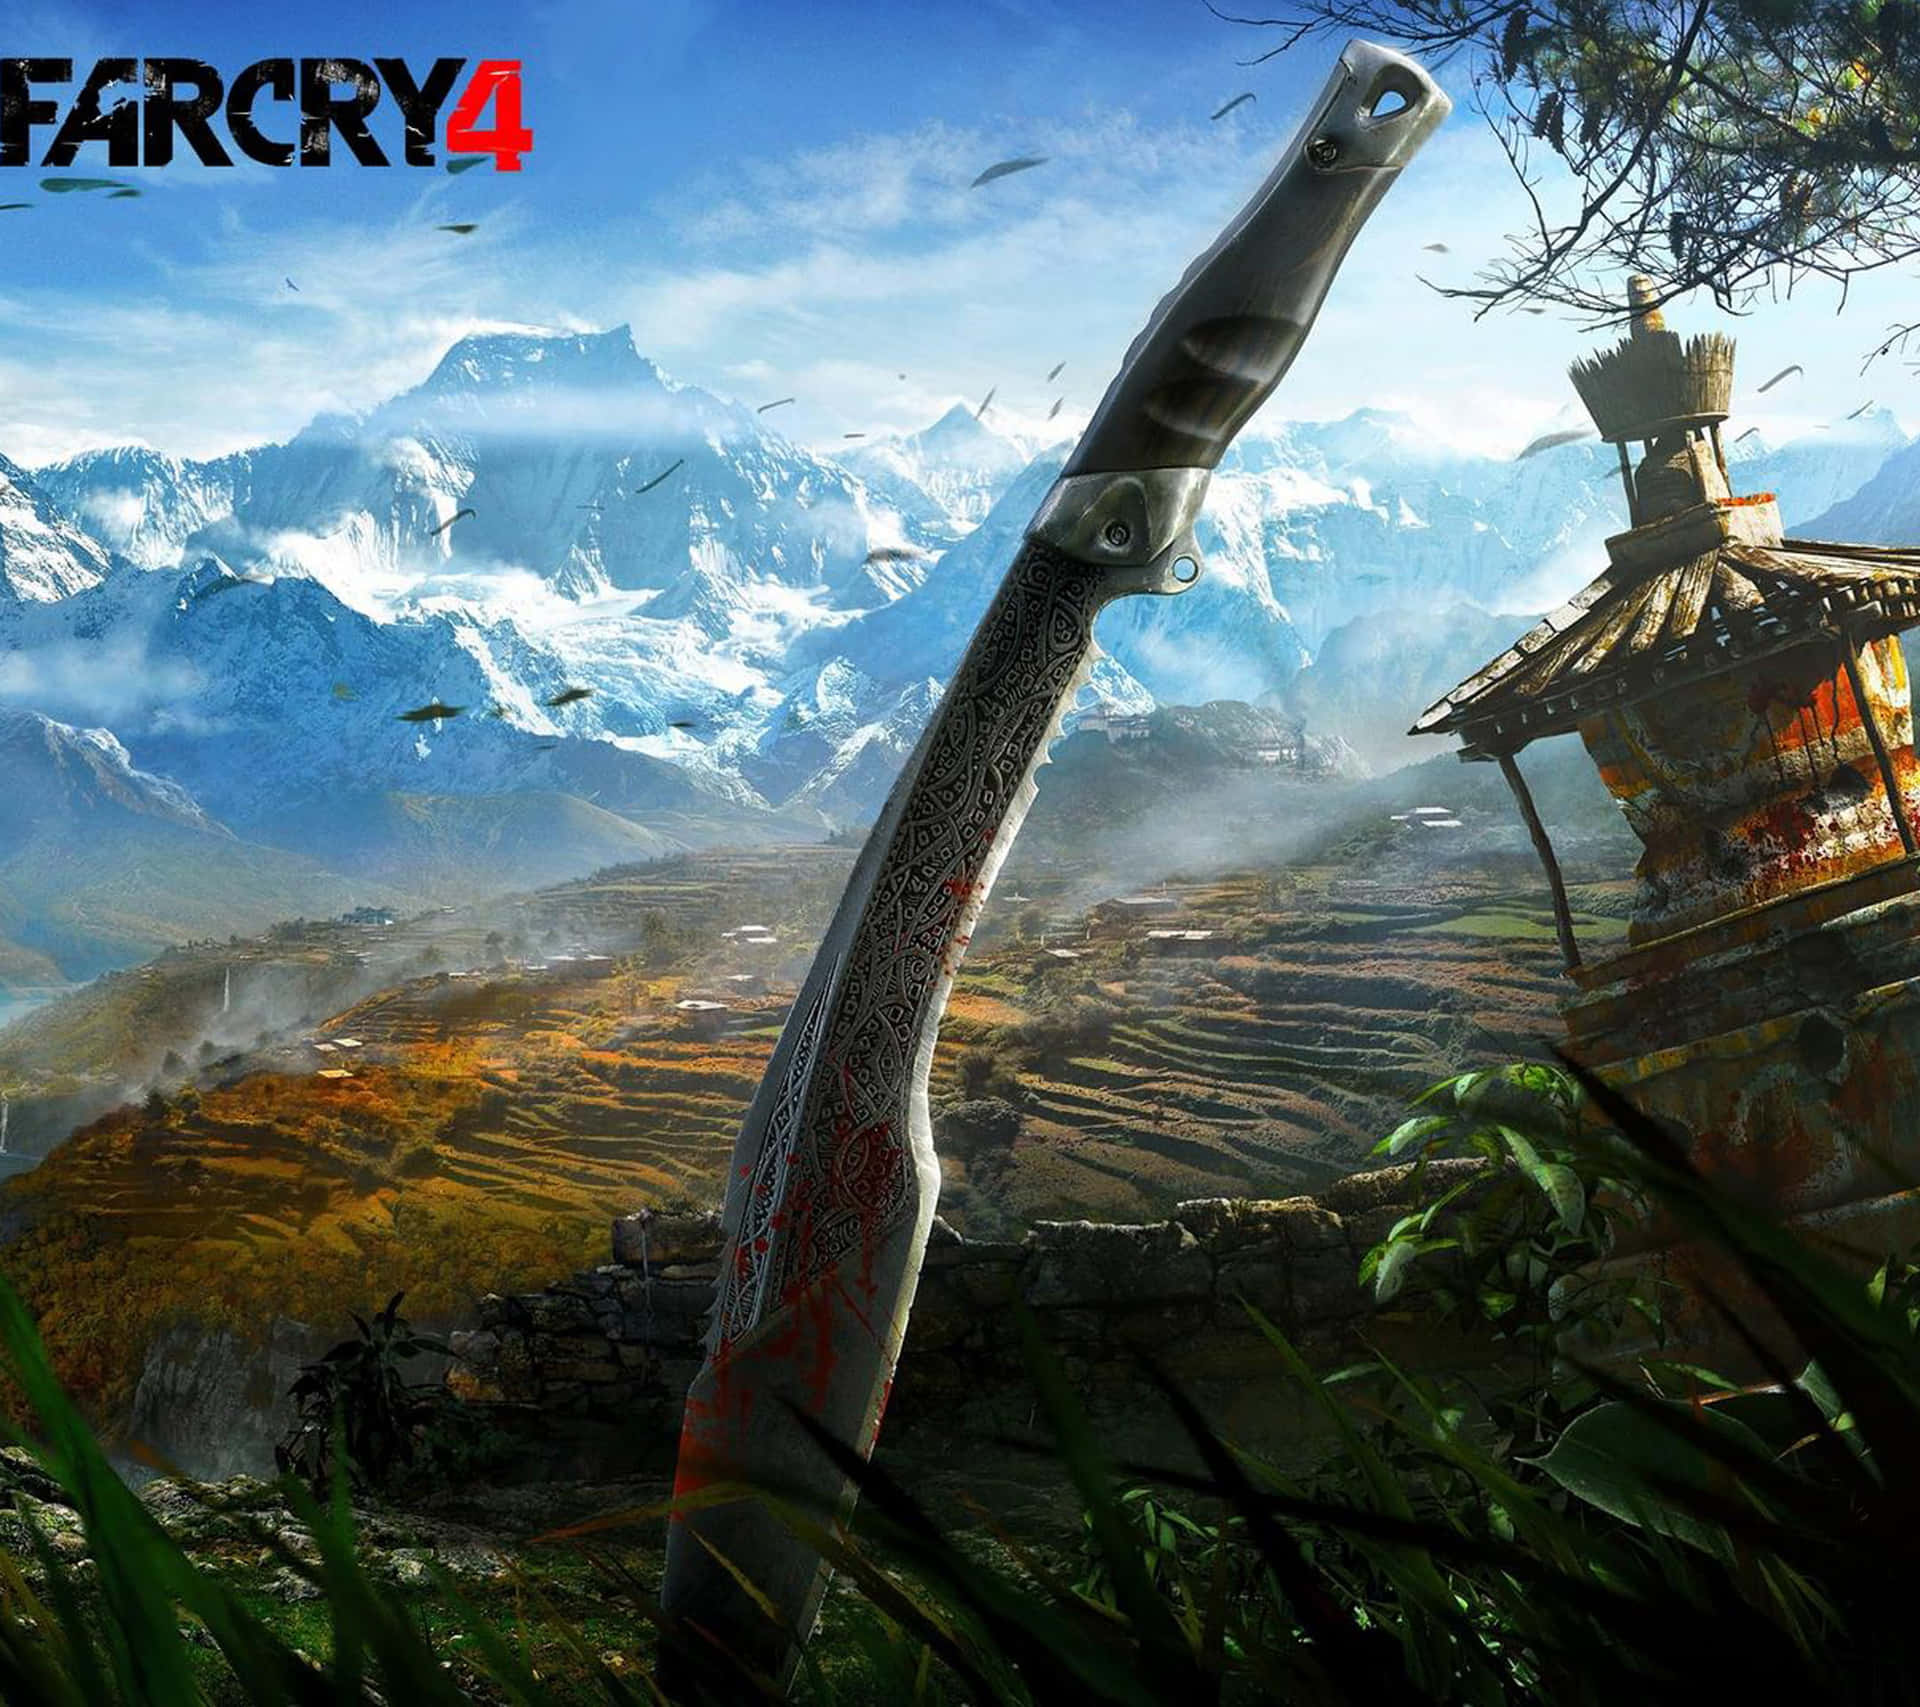 Caption: Majestic Mountainscape Of Kyrat In Far Cry 4